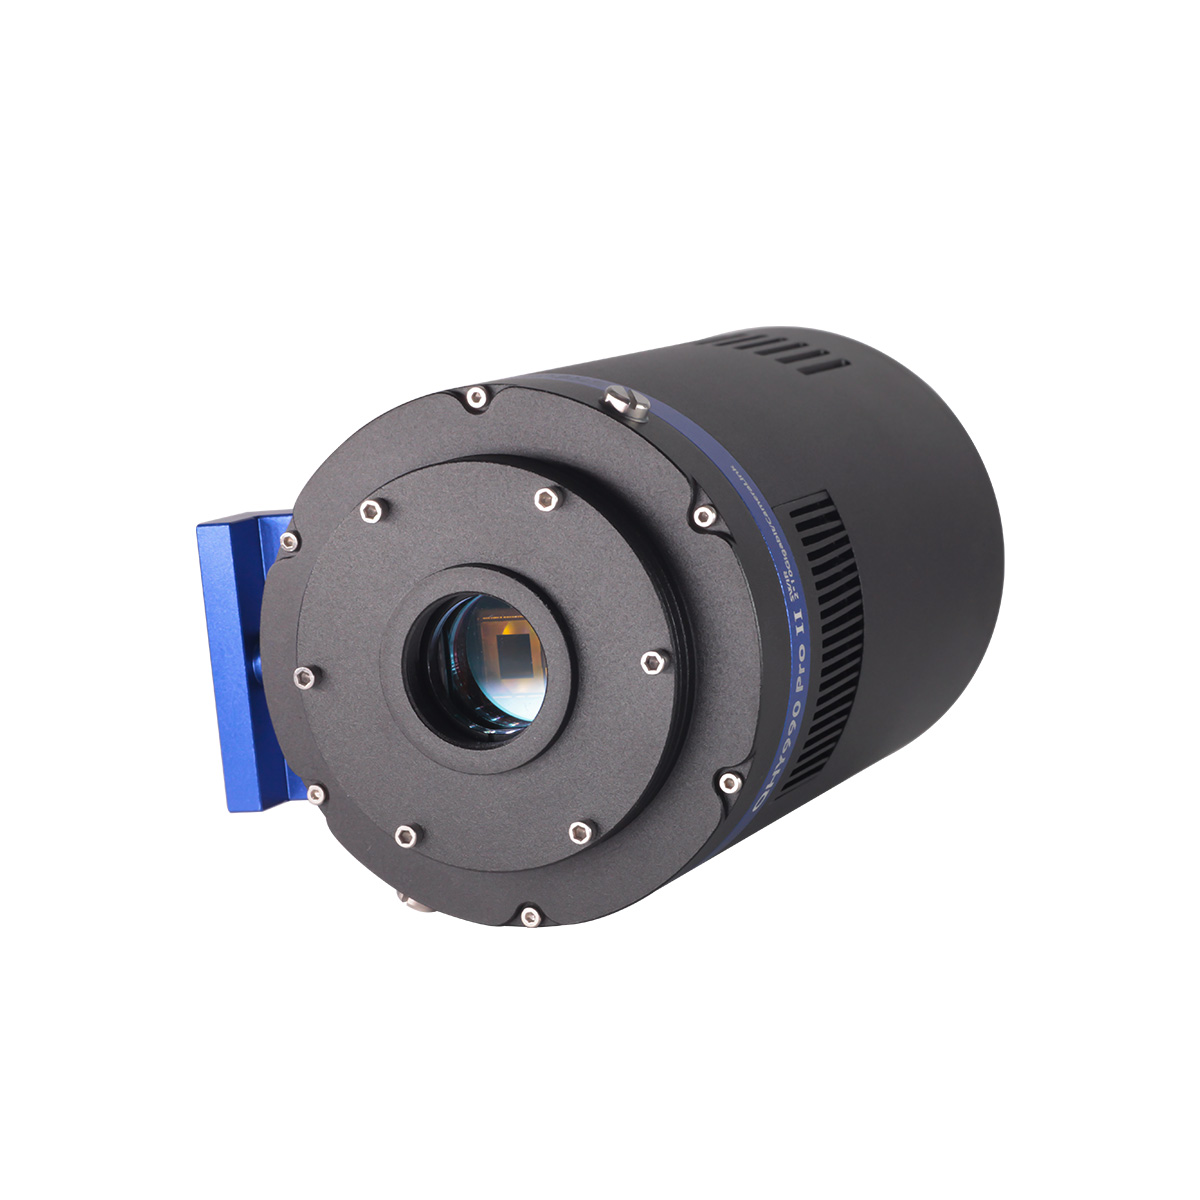 QHY990 & QHY991 SWIR Scientific Camera are the short-wave infrared scientific research camera with Sony InGaAs IMX990 / IMX991 sensor.